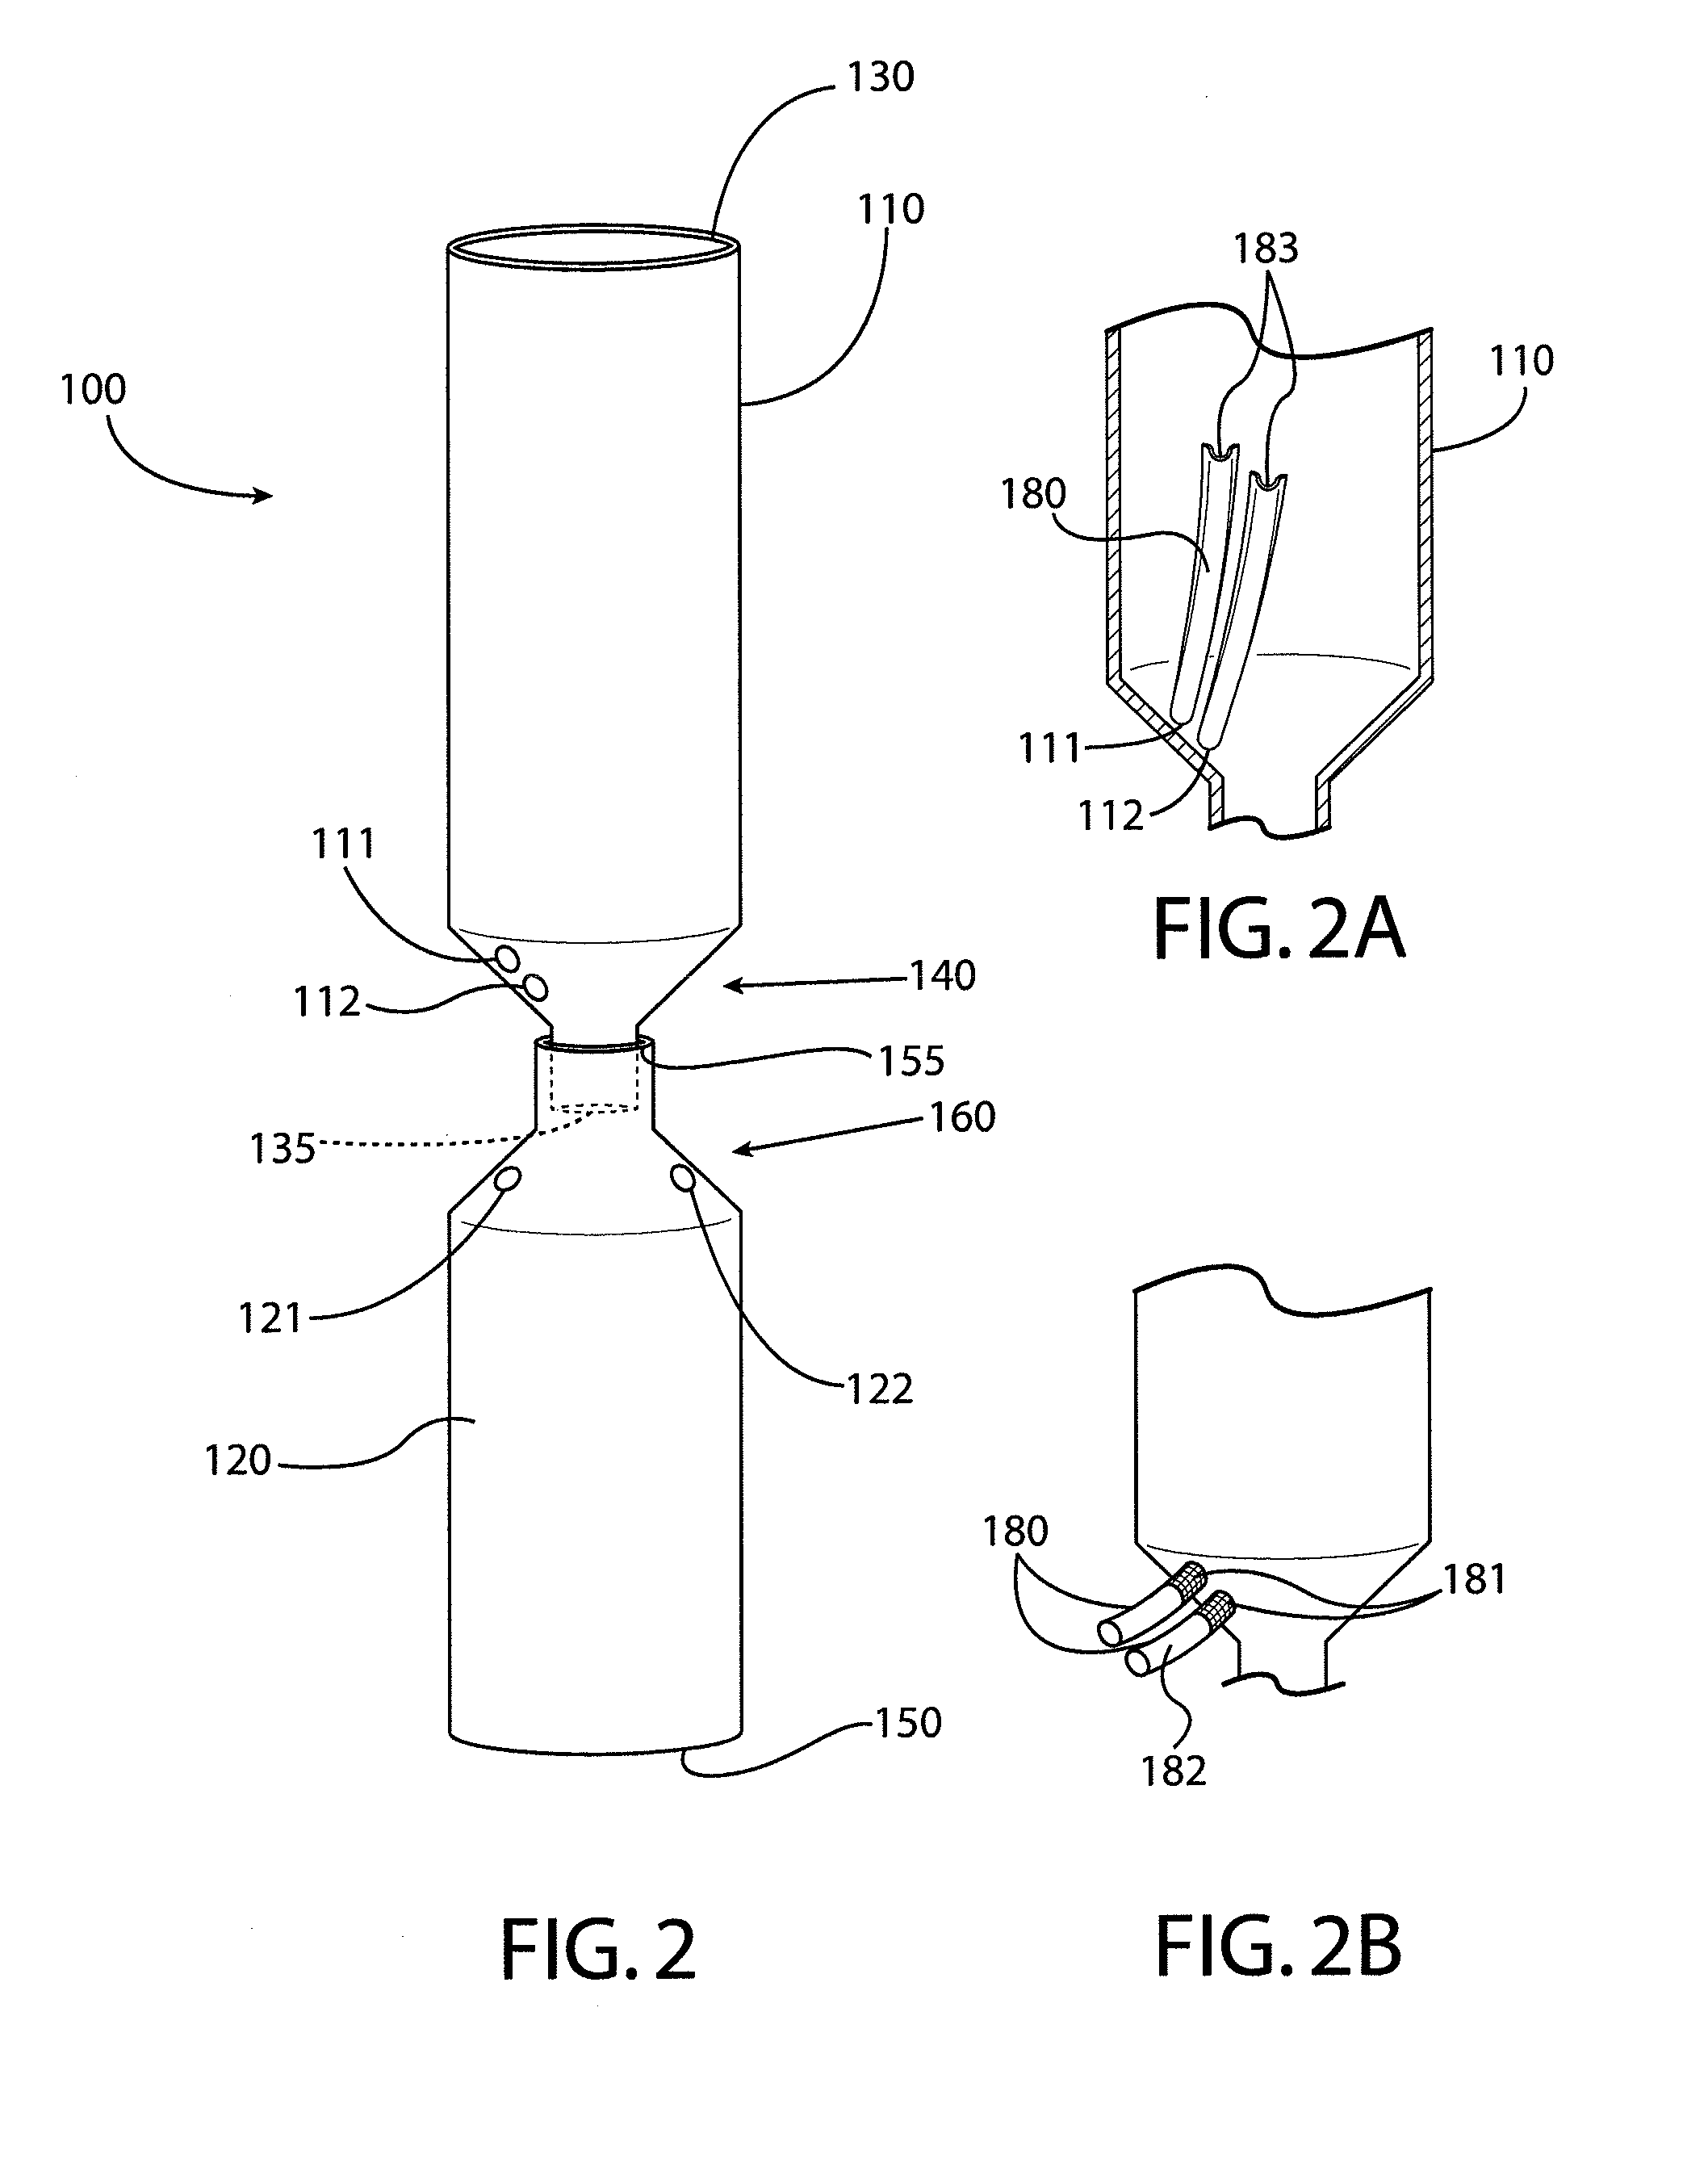 Method and apparatus for endovascular therapy of aortic pathology